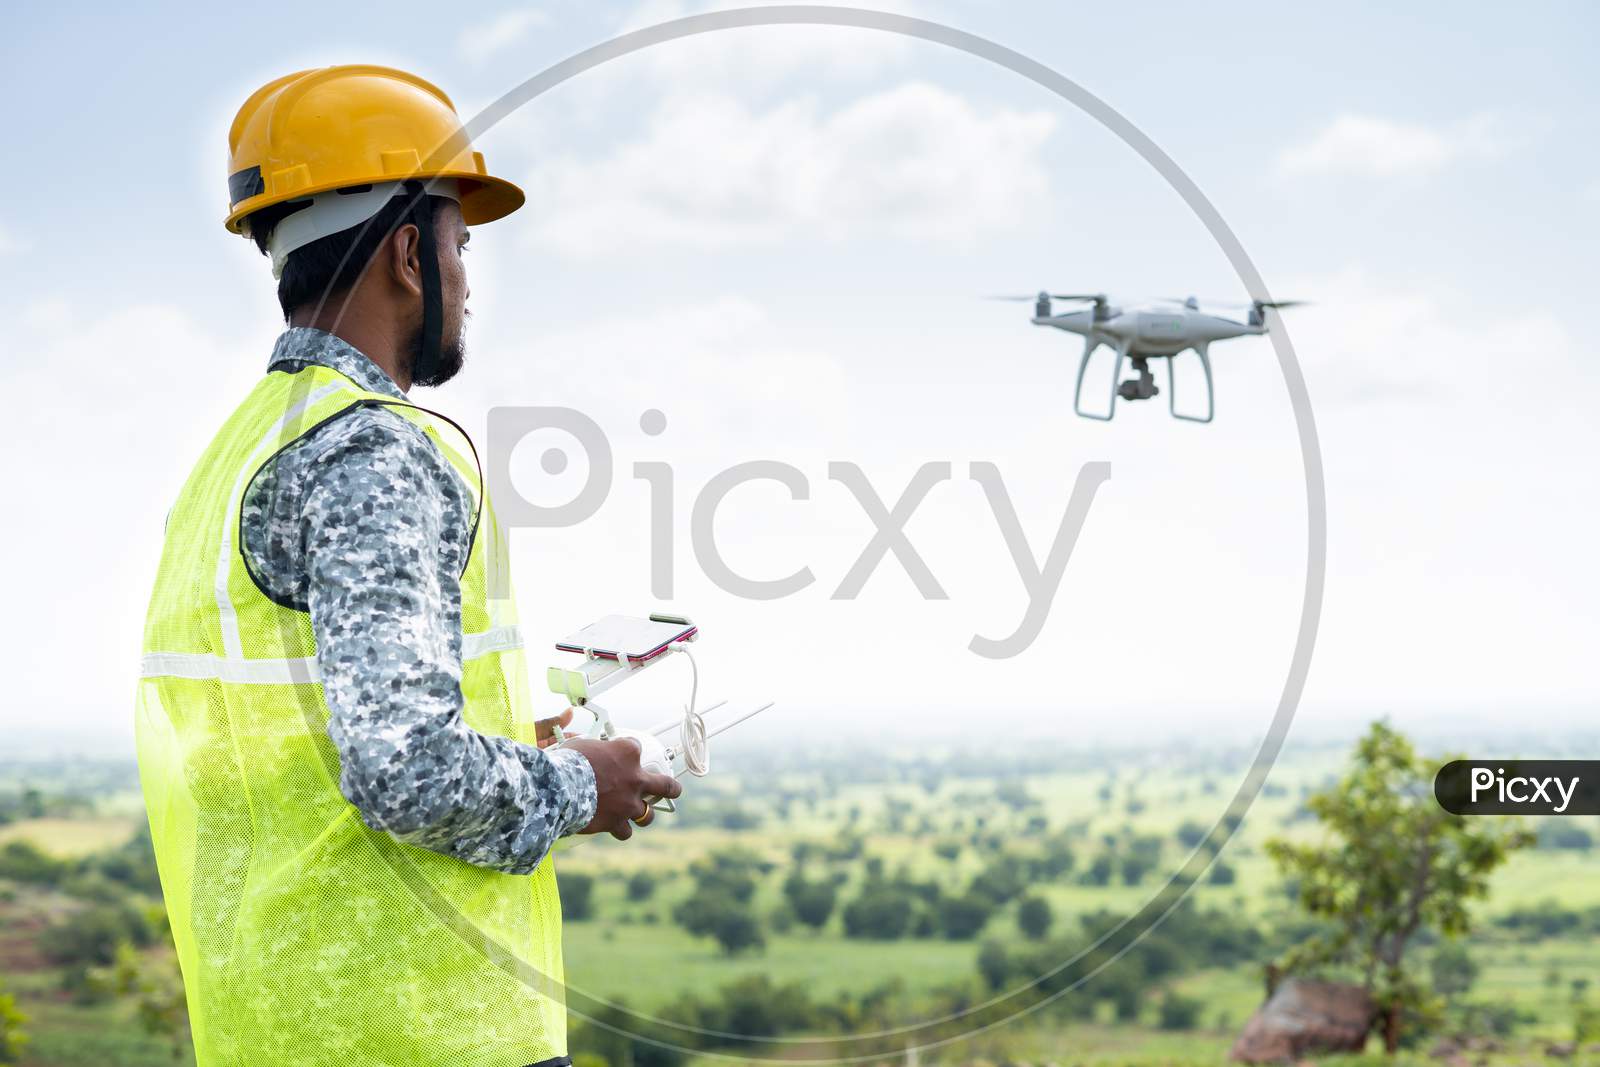 Pilot With Safety Hardhat Flying Drone Using Remote Controller - Concept Of Engineer Doing Aerial Survey Or Inspection Using Uav.